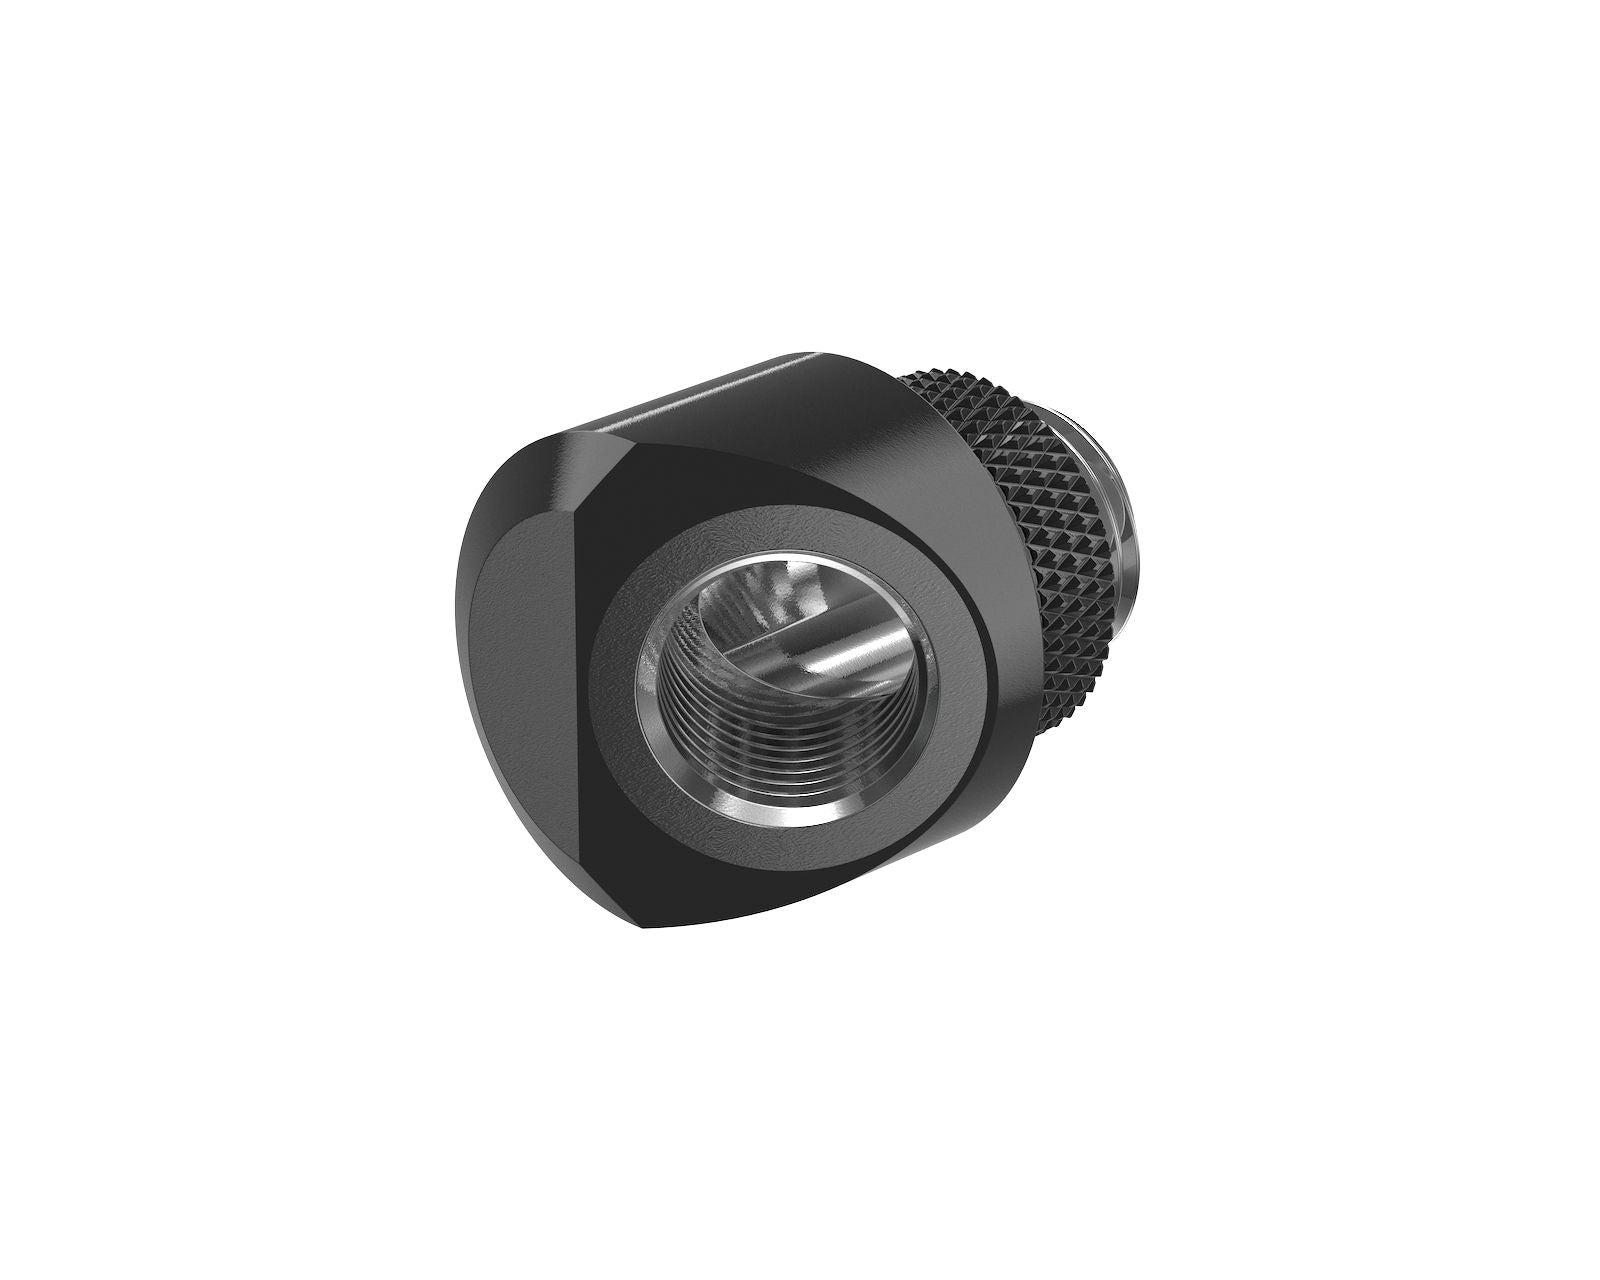 PrimoChill InterConnectSX Flat 45 Degree Rotary Fitting (FAF45) – Enhanced PC Cooling with Sleek Aesthetics - Available in 20+ Colors, Custom Watercooling Loop Ready - Satin Black